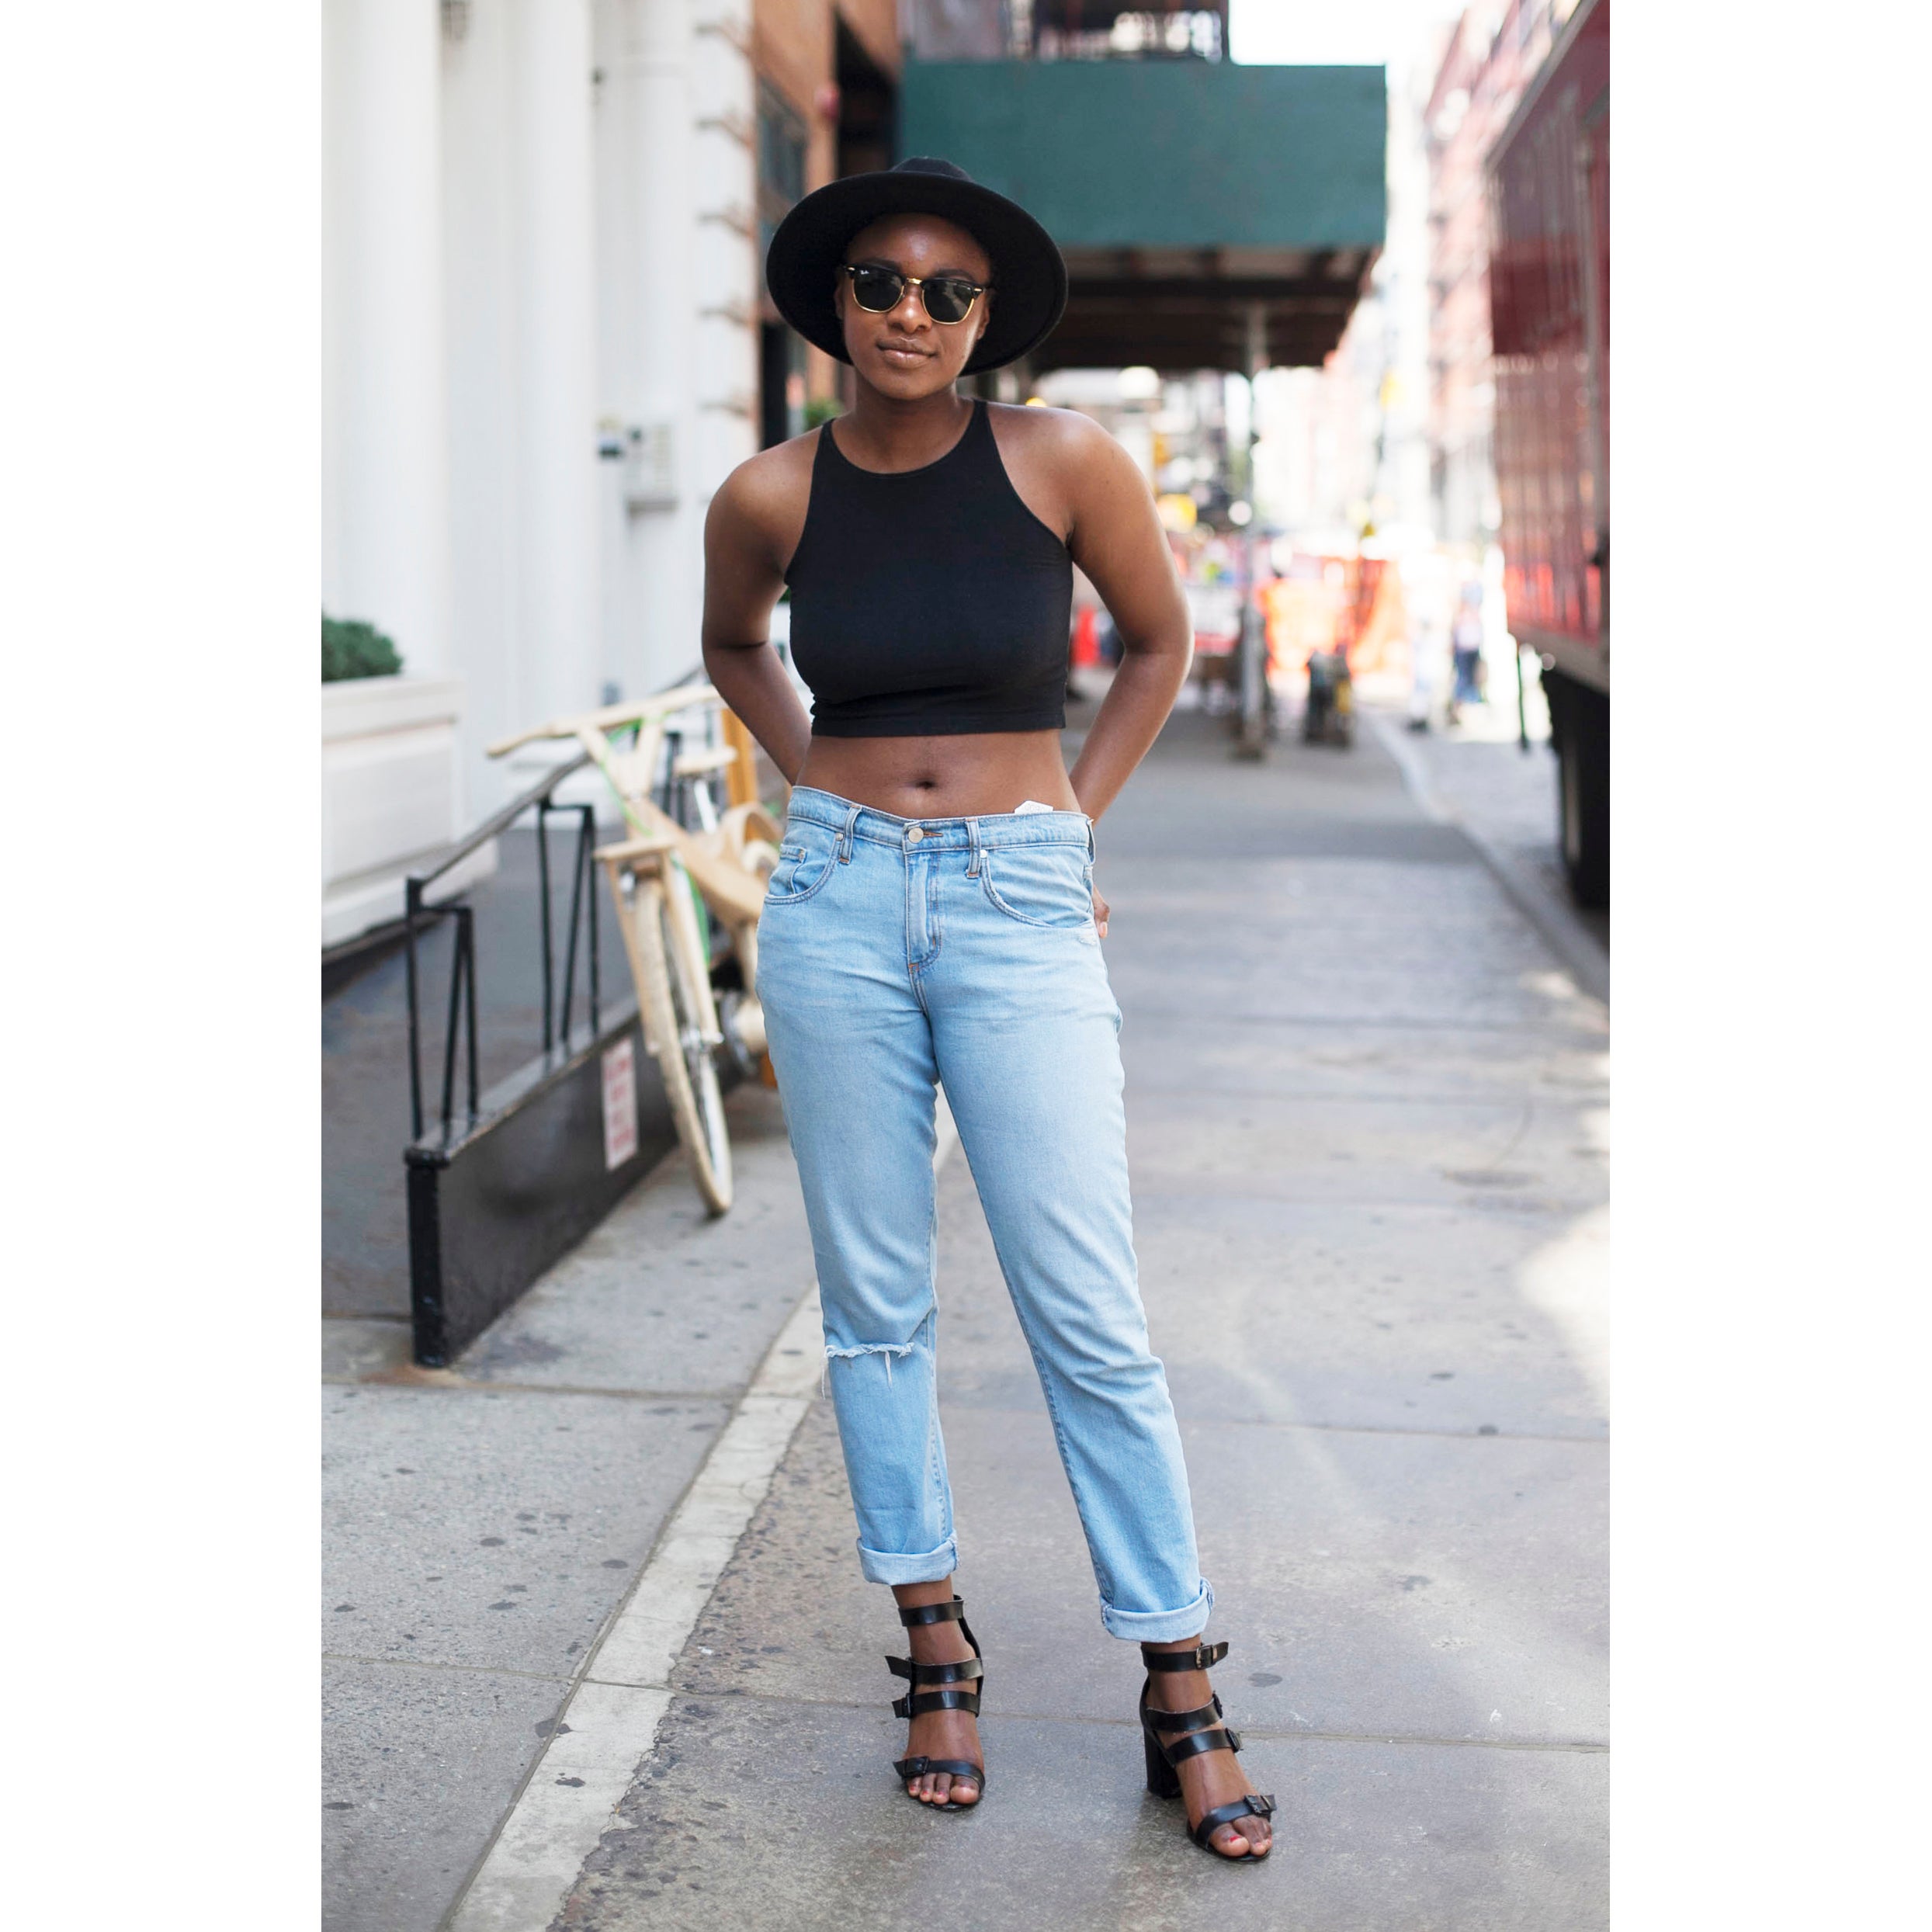 Street Style: Summer In The City
